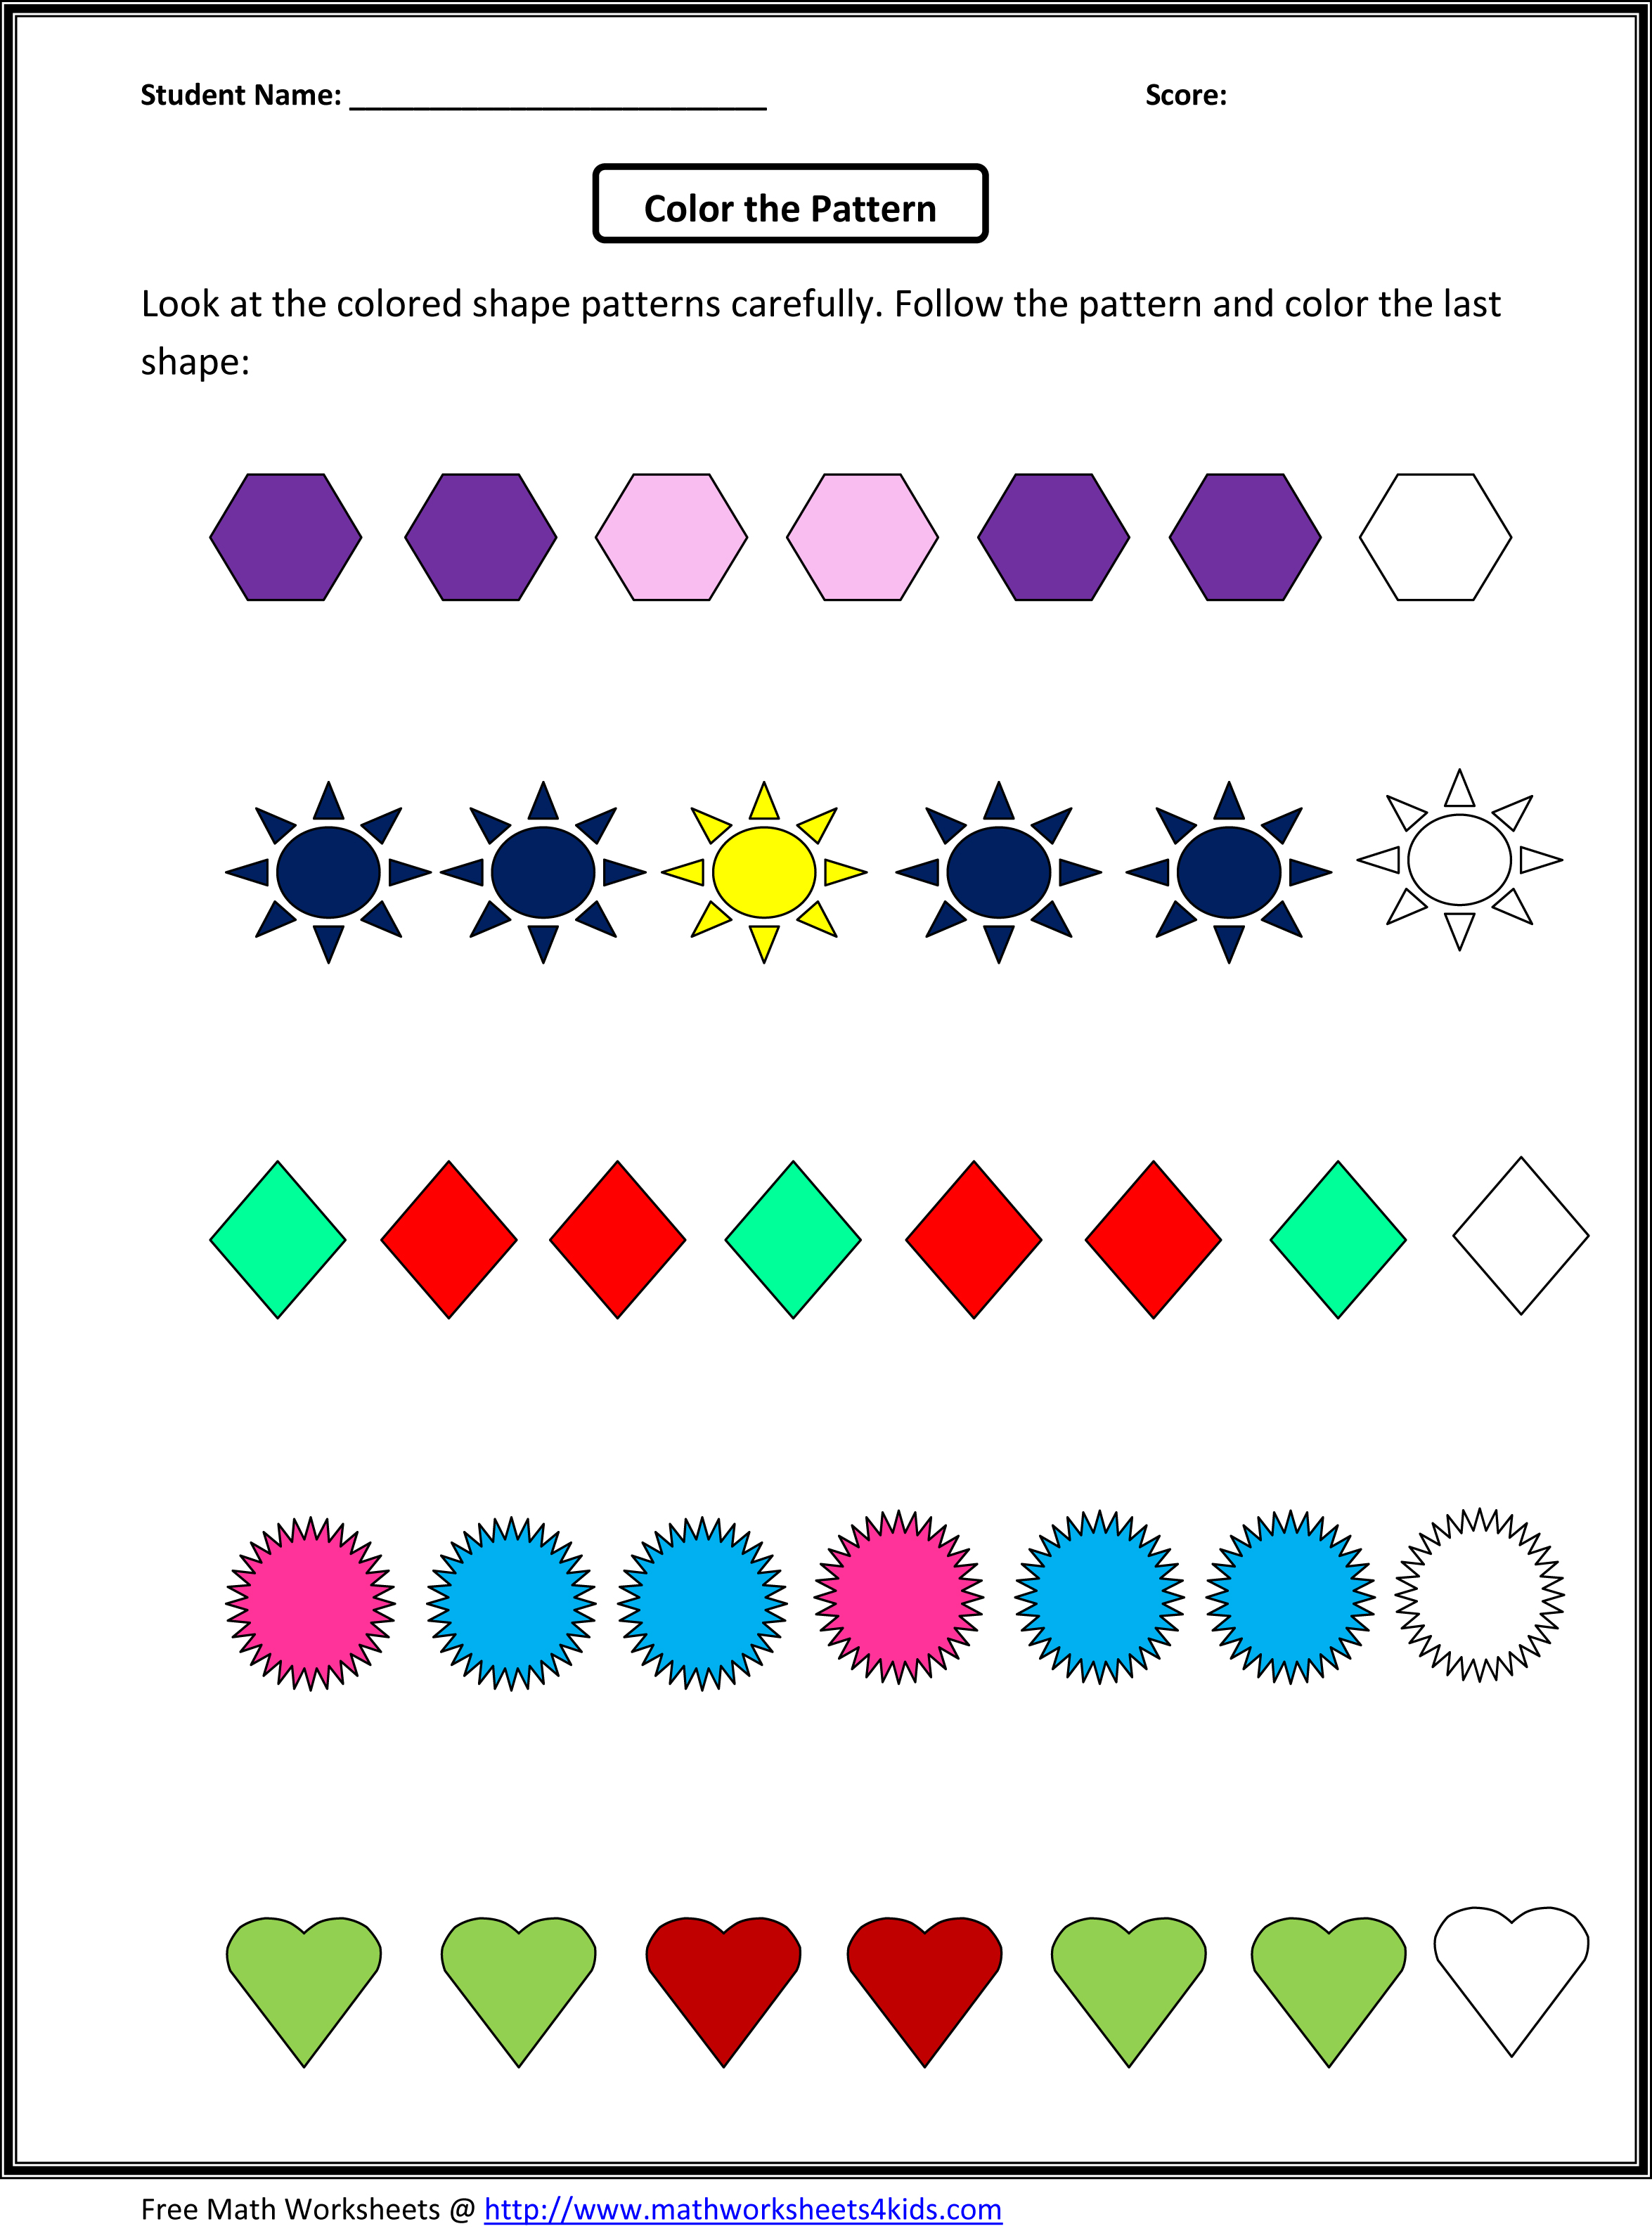 Math Patterns Sequences | Patterns Gallery